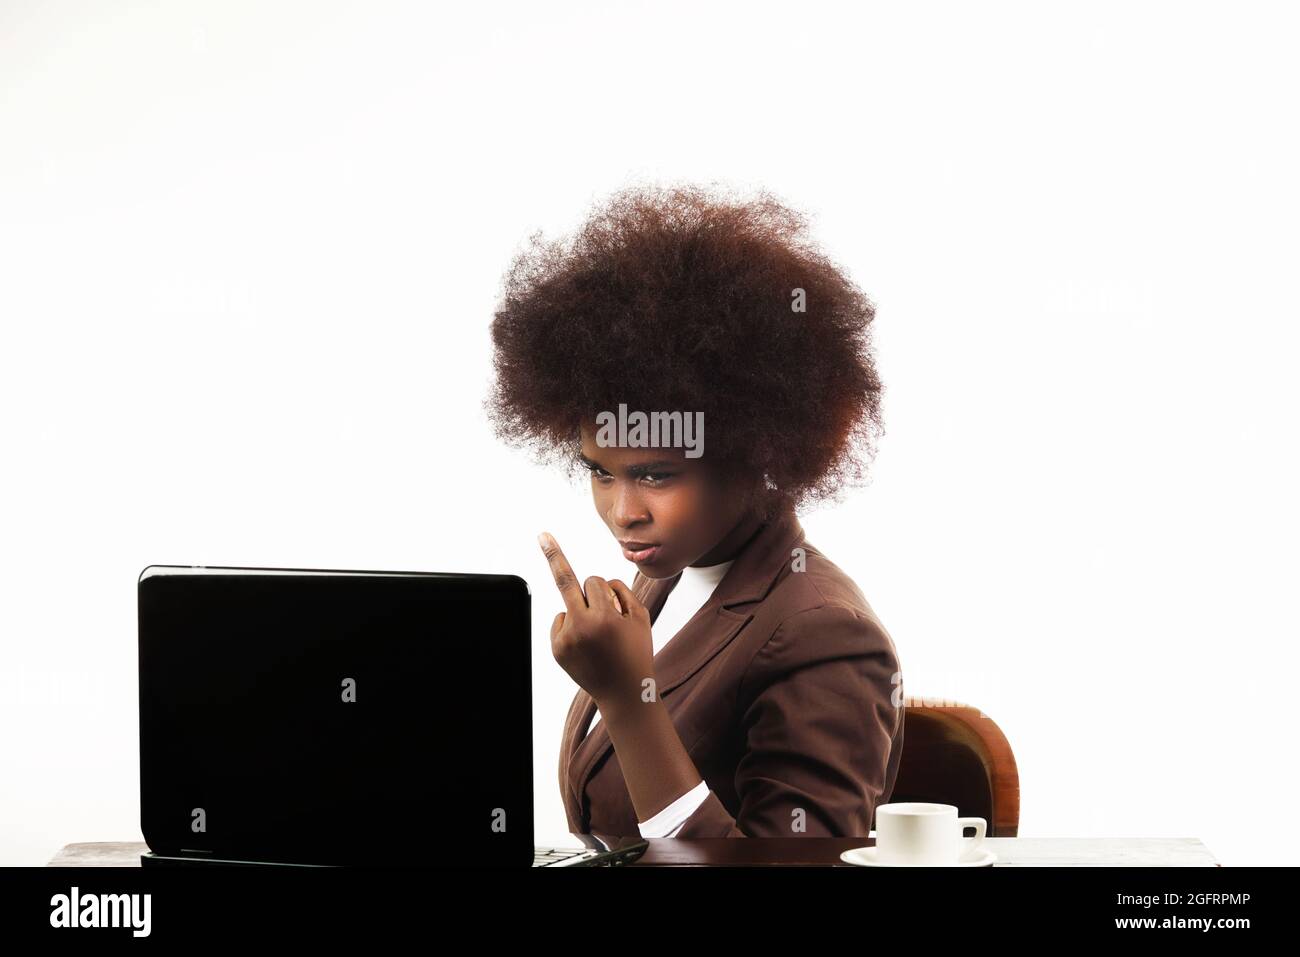 Young black Hispanic Latina business executive woman, with afro hair, with angry gesture looking at her laptop, in white background Stock Photo